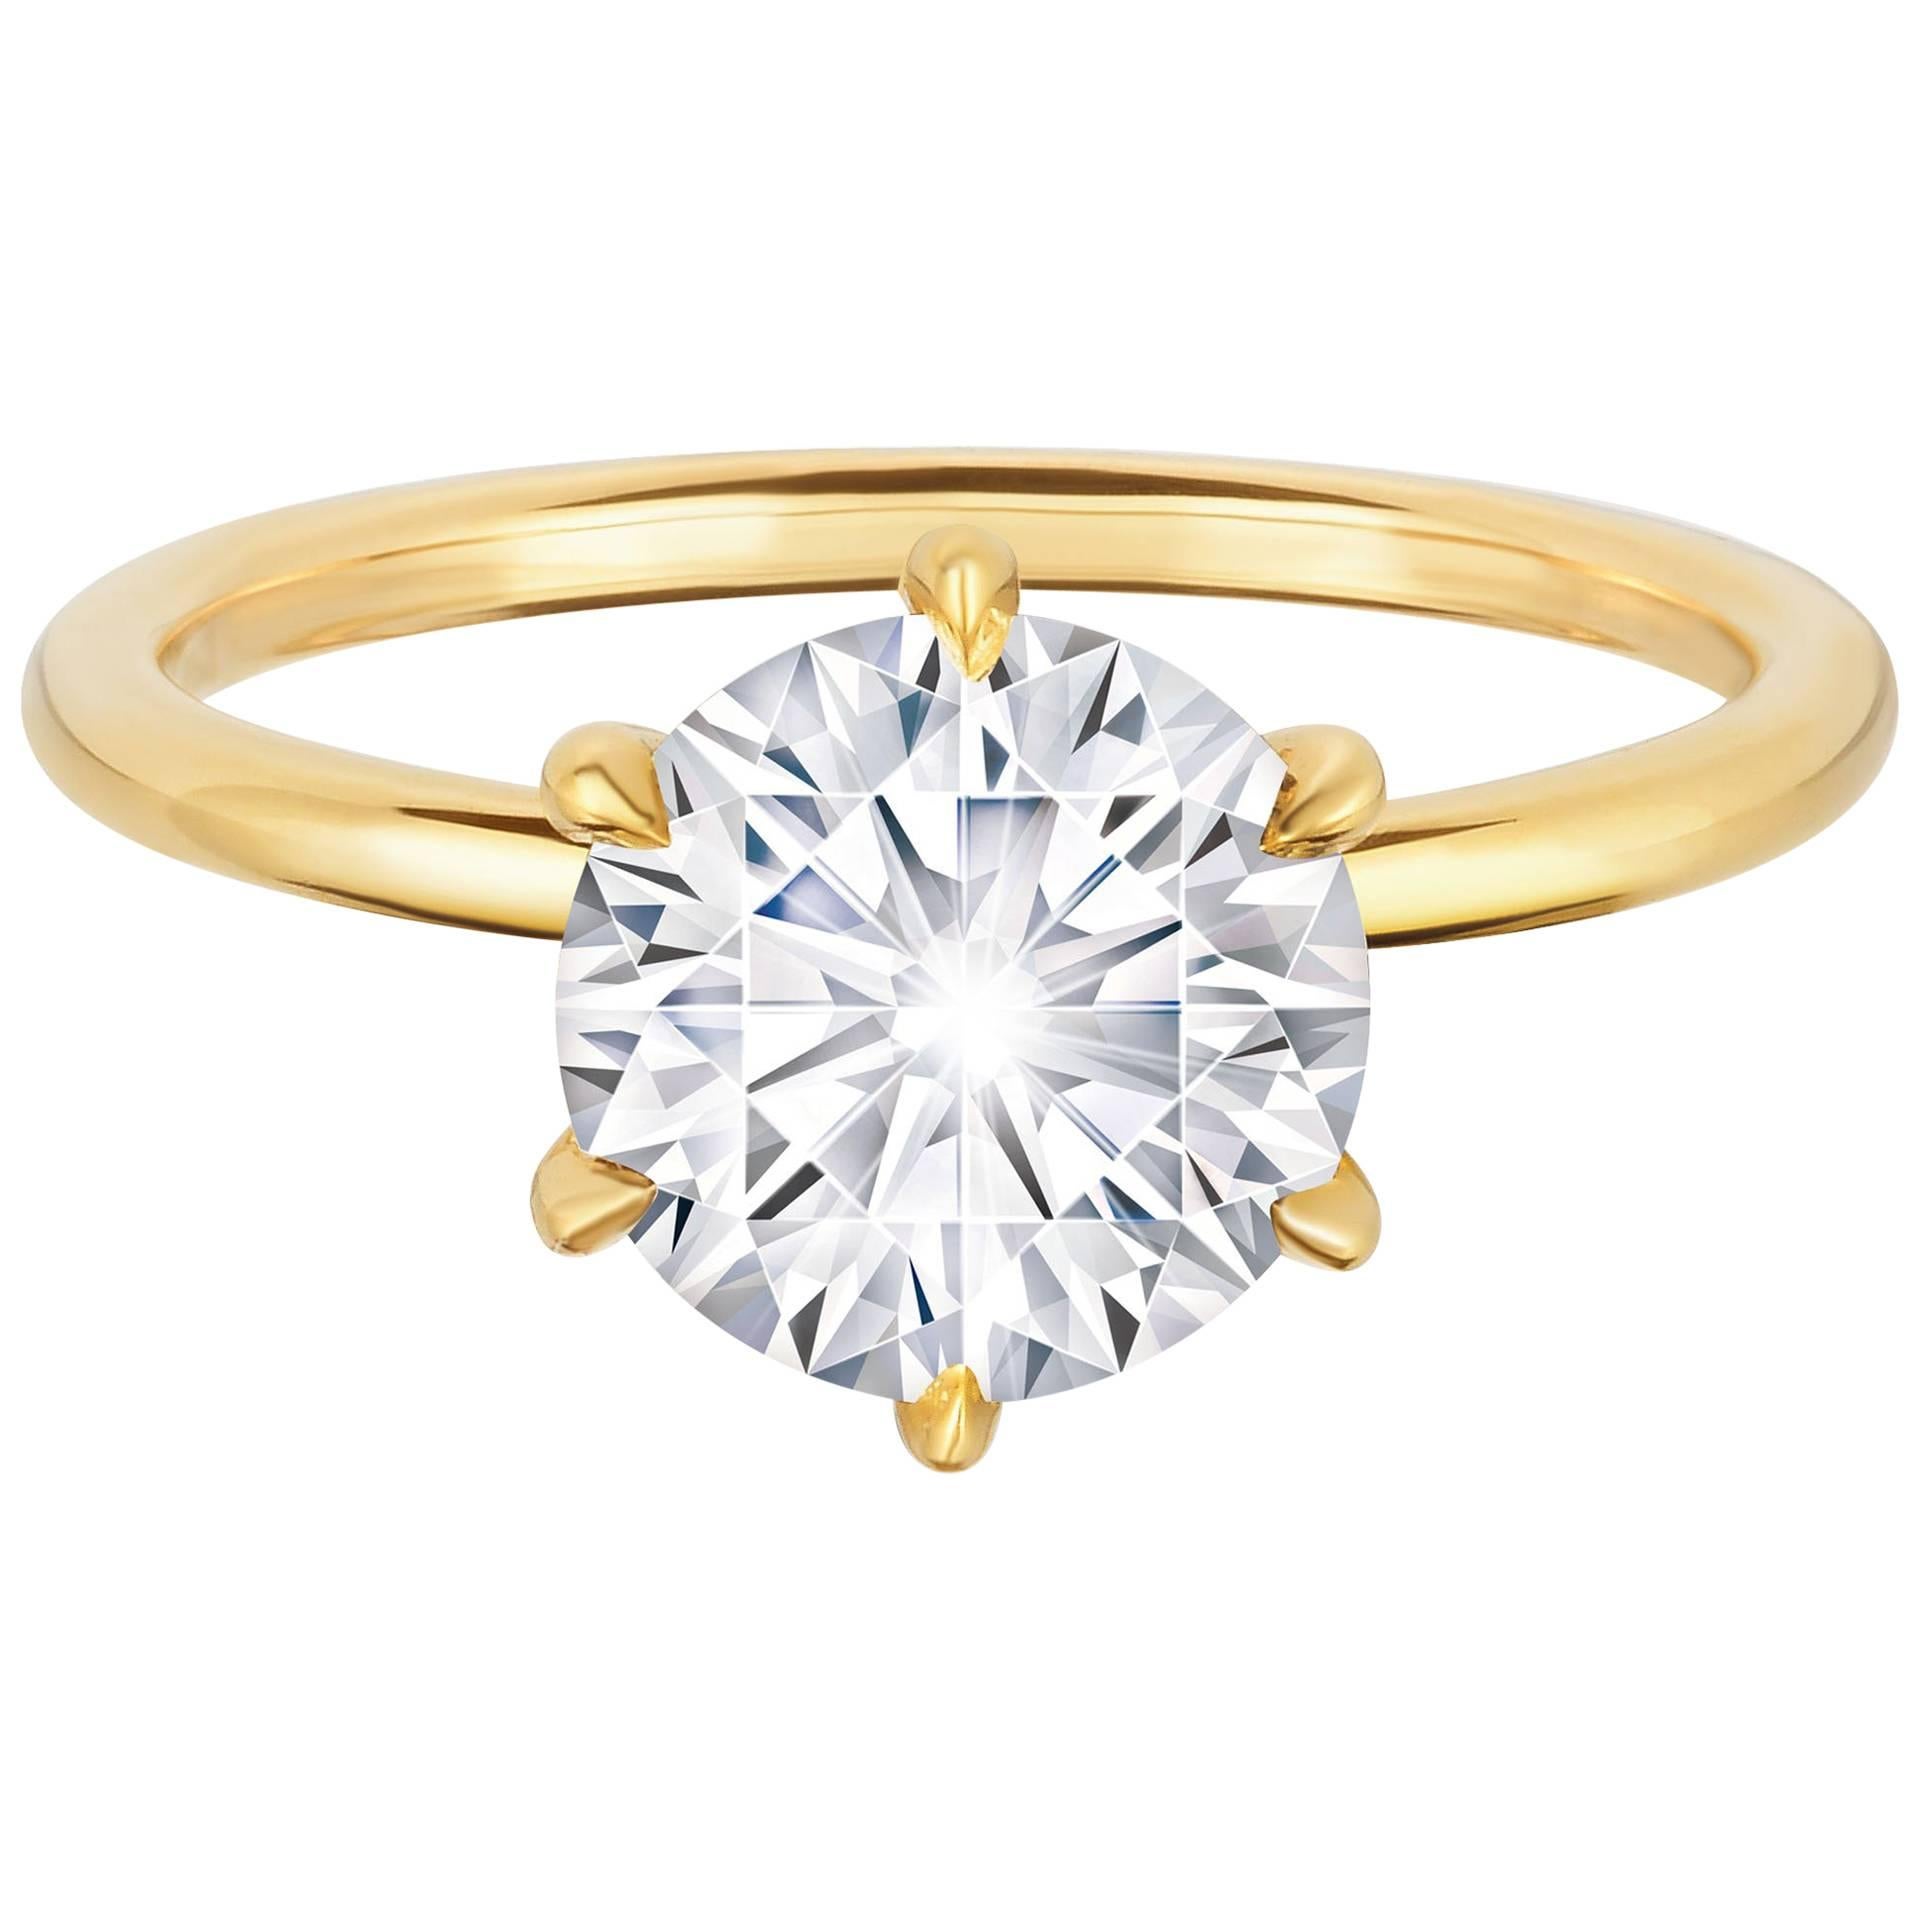 Marisa Perry 2.22 Carat Round Diamond Engagement Ring in Yellow Gold For Sale